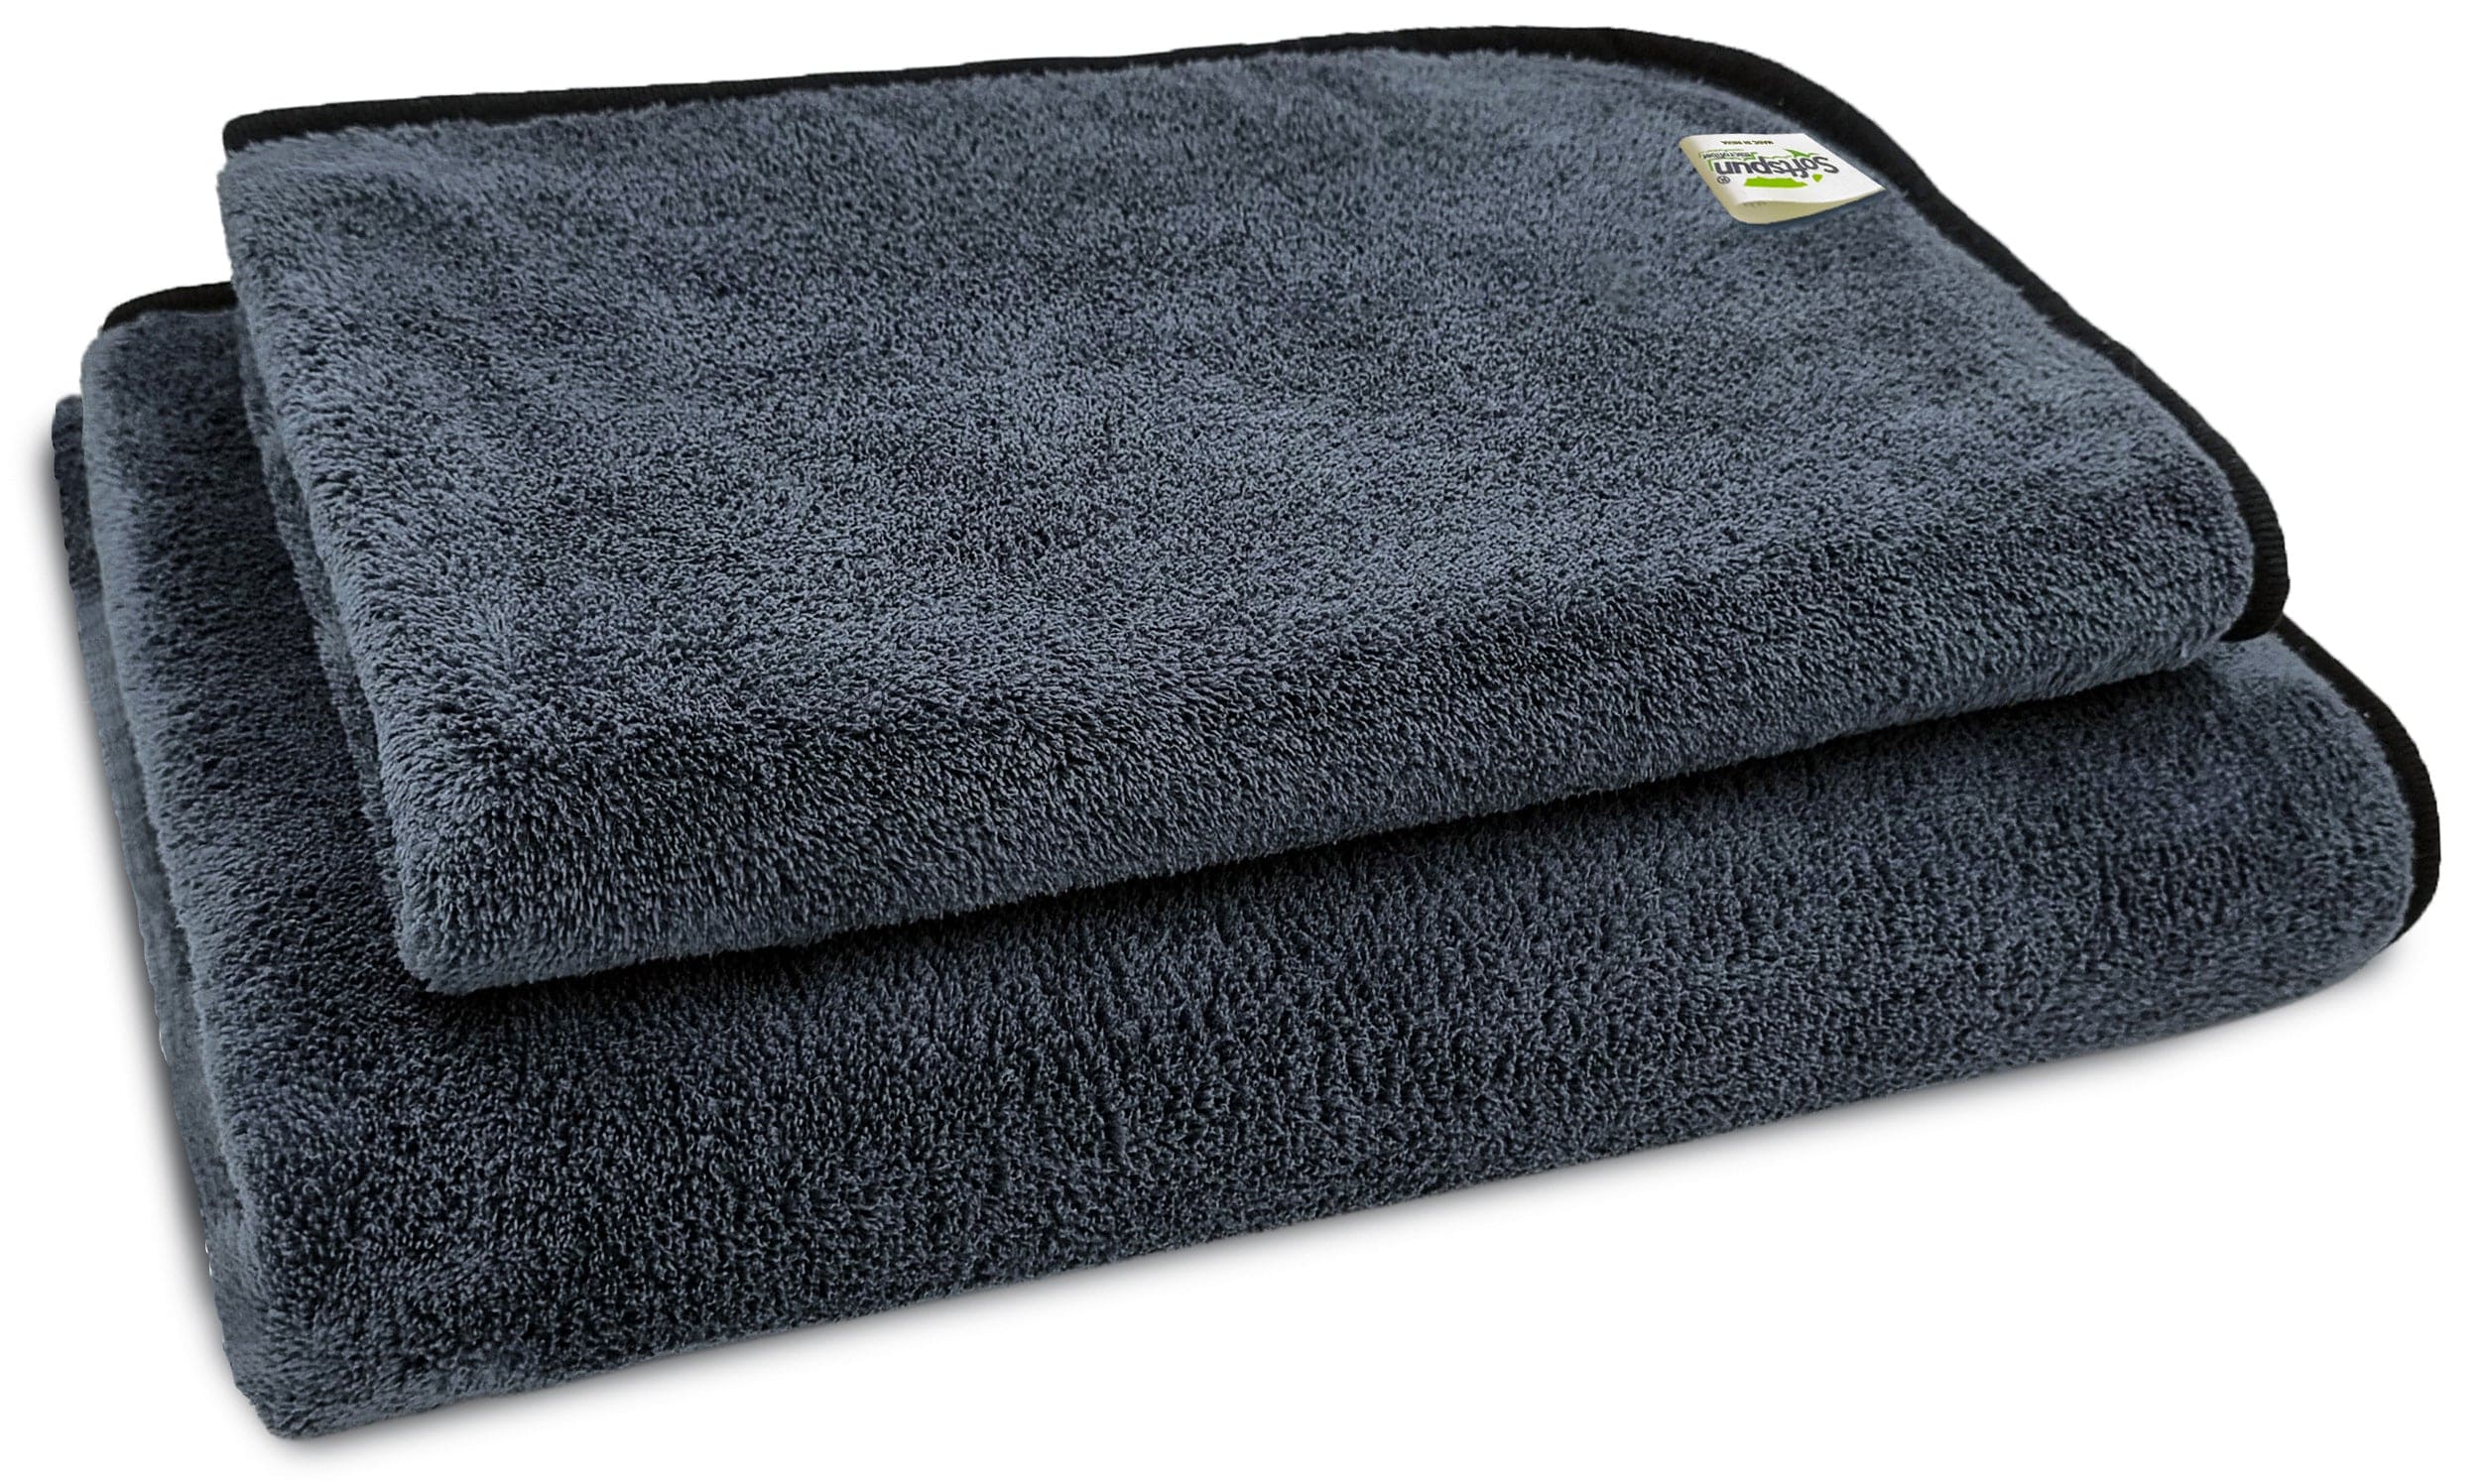 SOFTSPUN Microfiber Bath Towel 2 pc 70X140cm & 40X60cm 280GSM  Ultra Absorbent Super Soft & Comfortable Quick Drying for Men & Women Daily Use Pack of 1 Extra Large Size Unisex.